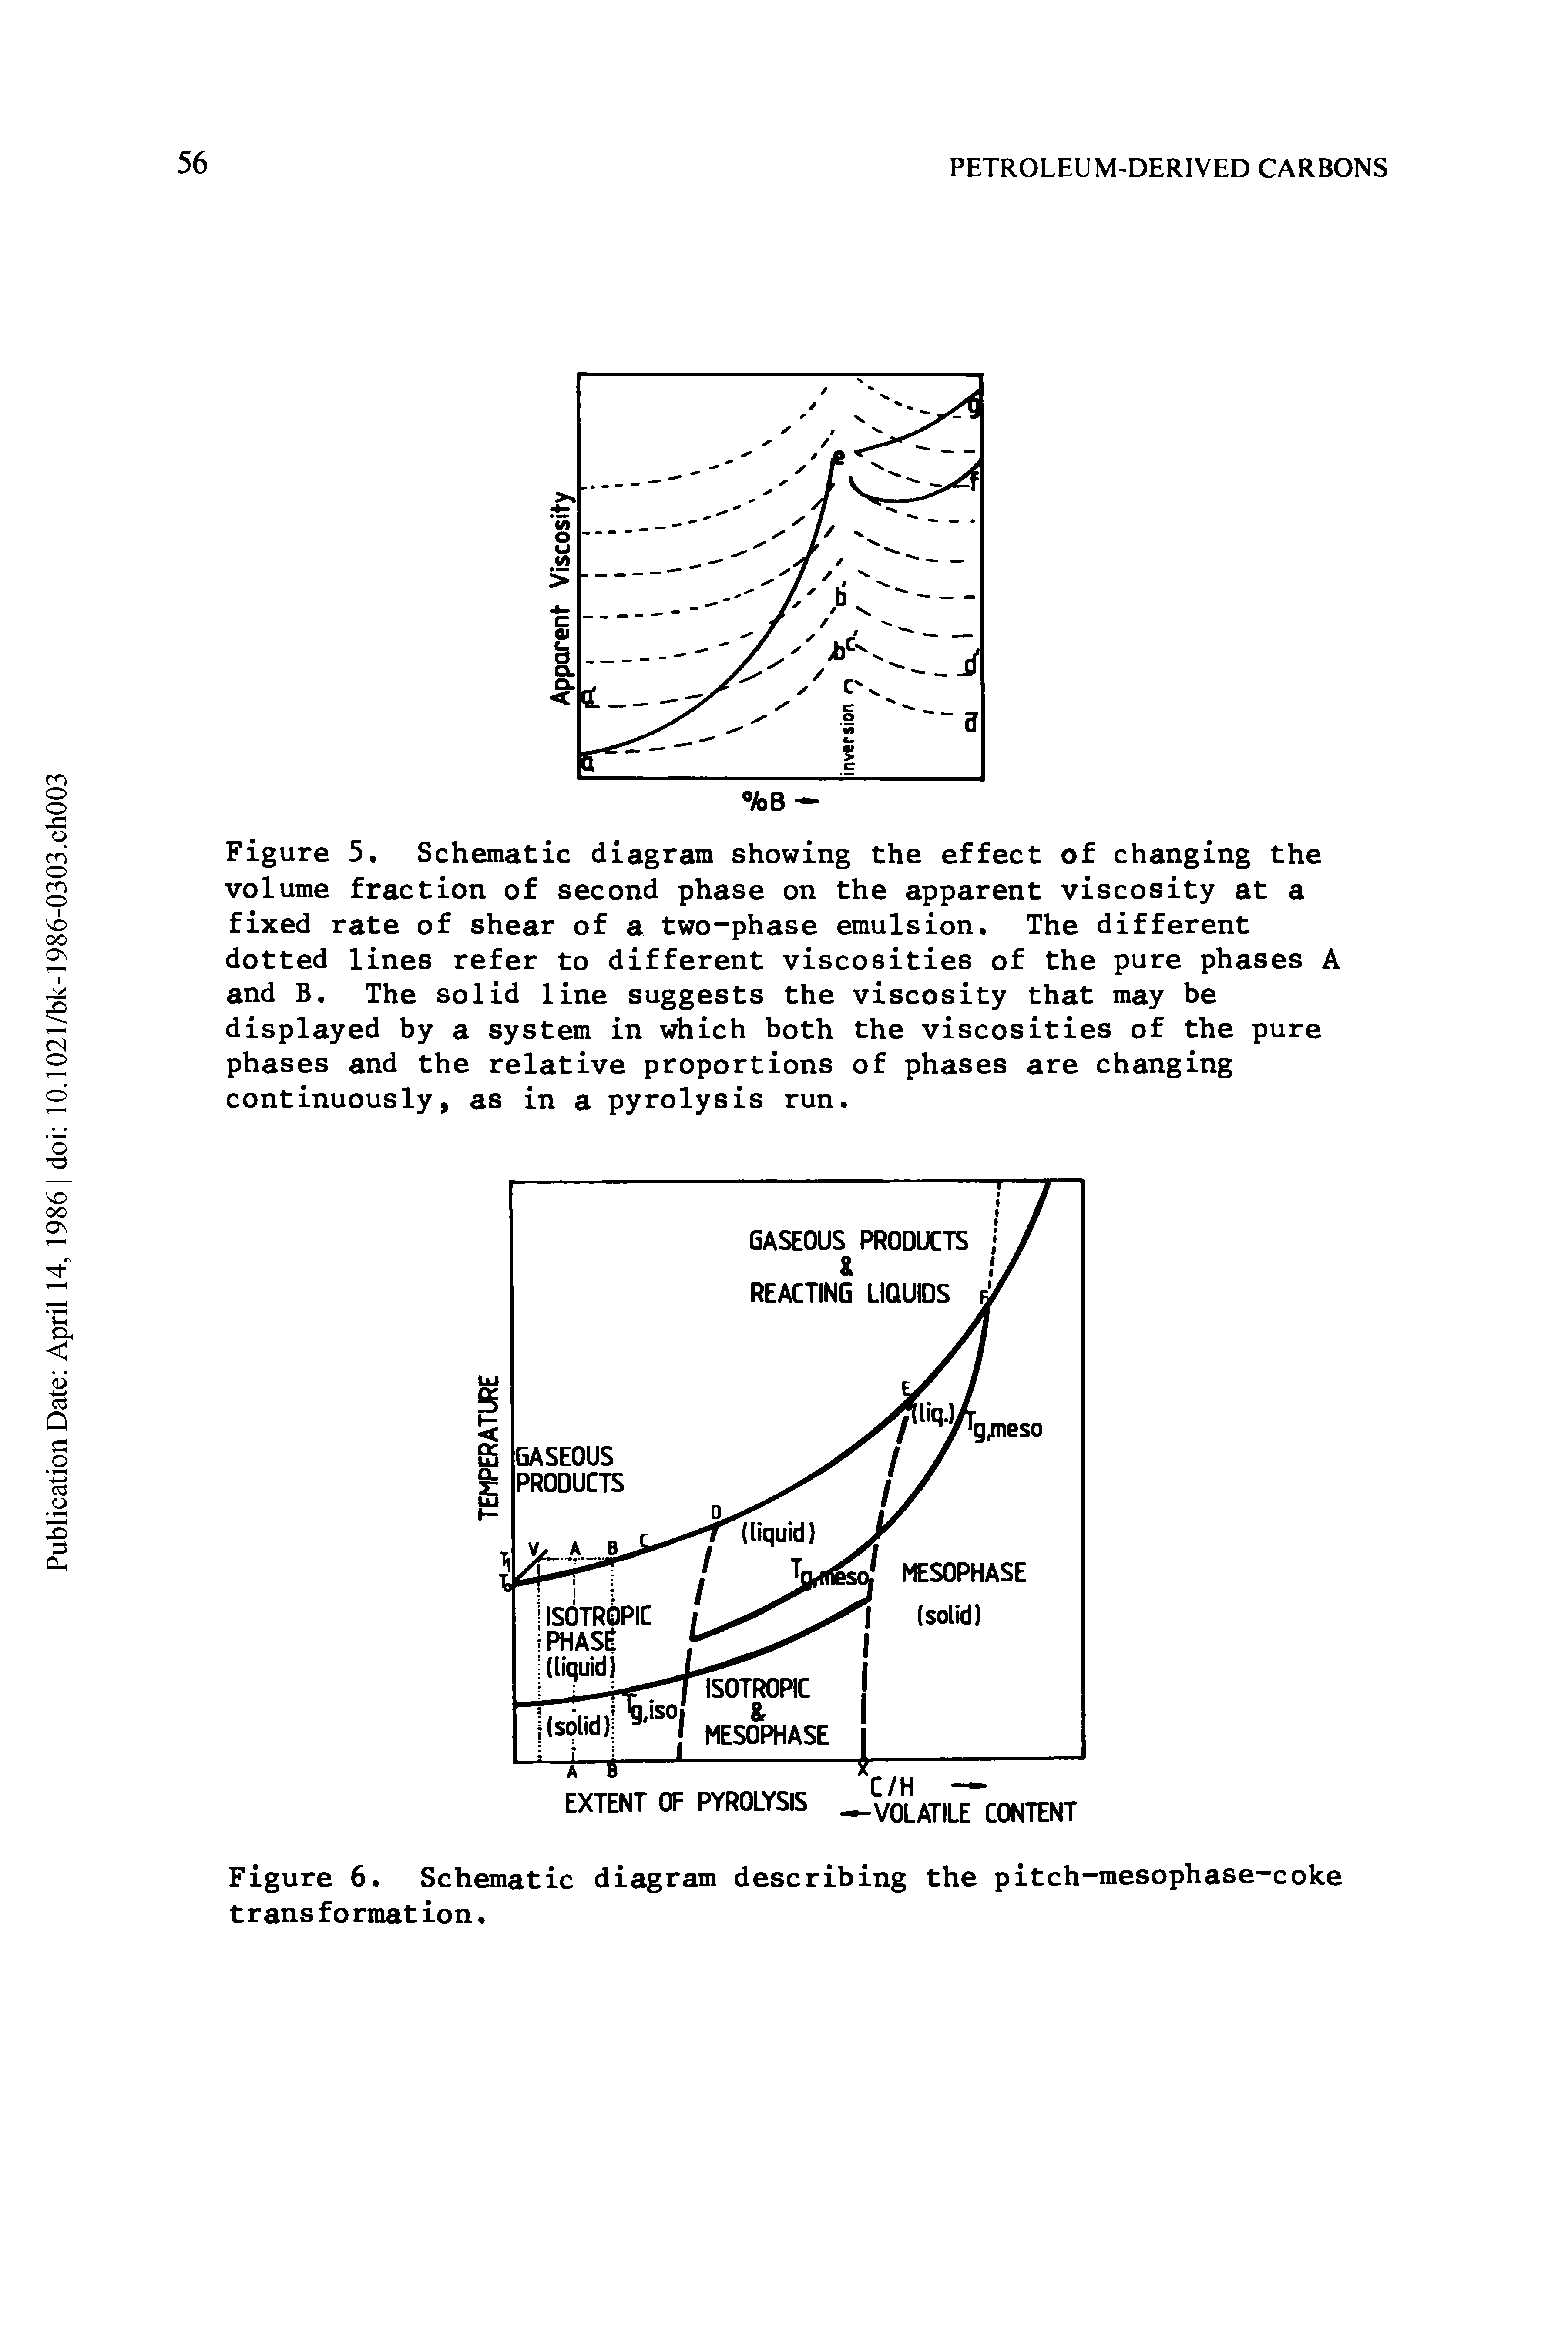 Figure 5. Schematic diagram showing the effect of changing the volume fraction of second phase on the apparent viscosity at a fixed rate of shear of a two-phase emulsion. The different dotted lines refer to different viscosities of the pure phases A and B, The solid line suggests the viscosity that may be displayed by a system in which both the viscosities of the pure phases and the relative proportions of phases are changing continuously, as in a pyrolysis run.